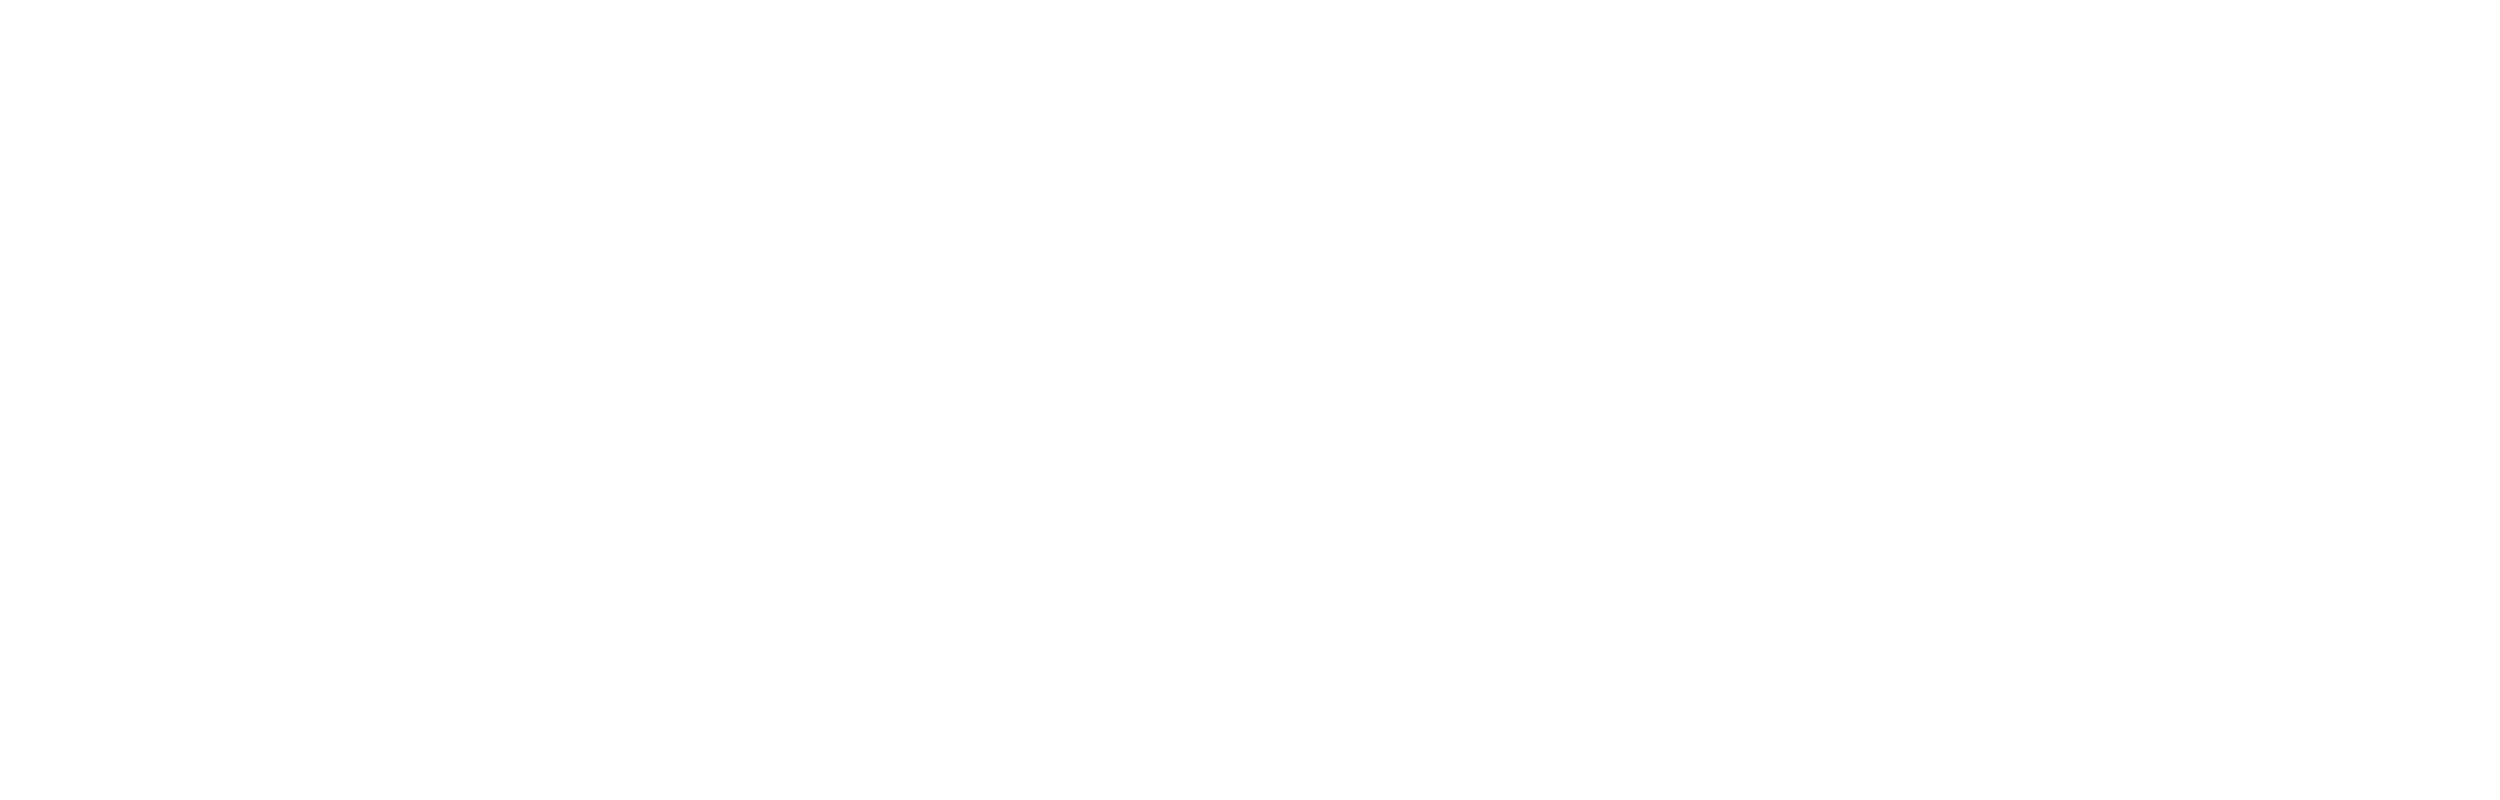 The Claims Adjusters Group